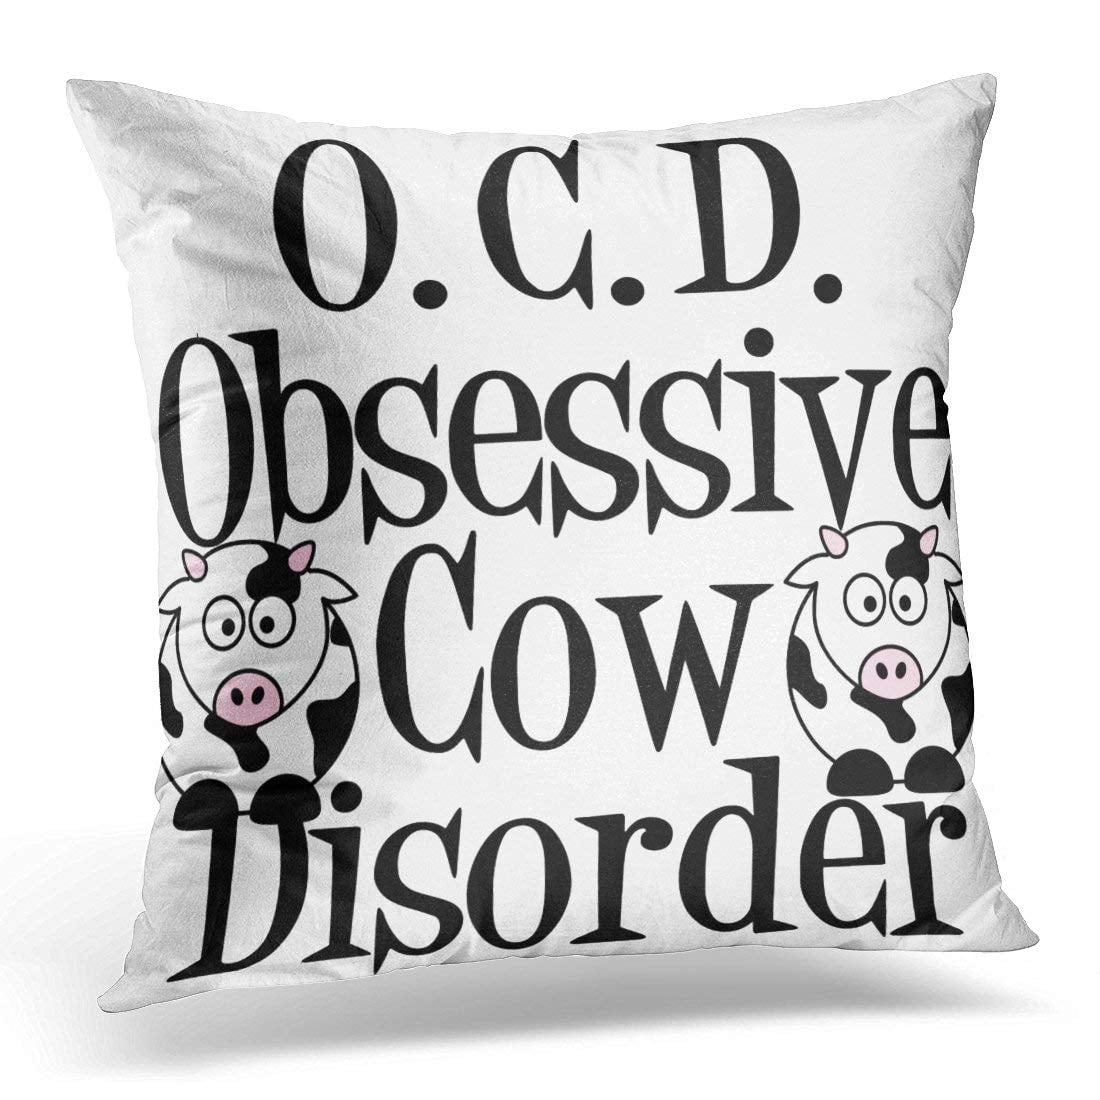 Cow Head Art Farmer Cowgirl Cow Lover Gifts Colorfull Art Farmer Cowgirl Ranch Cow Head Throw Pillow 18x18 Multicolor